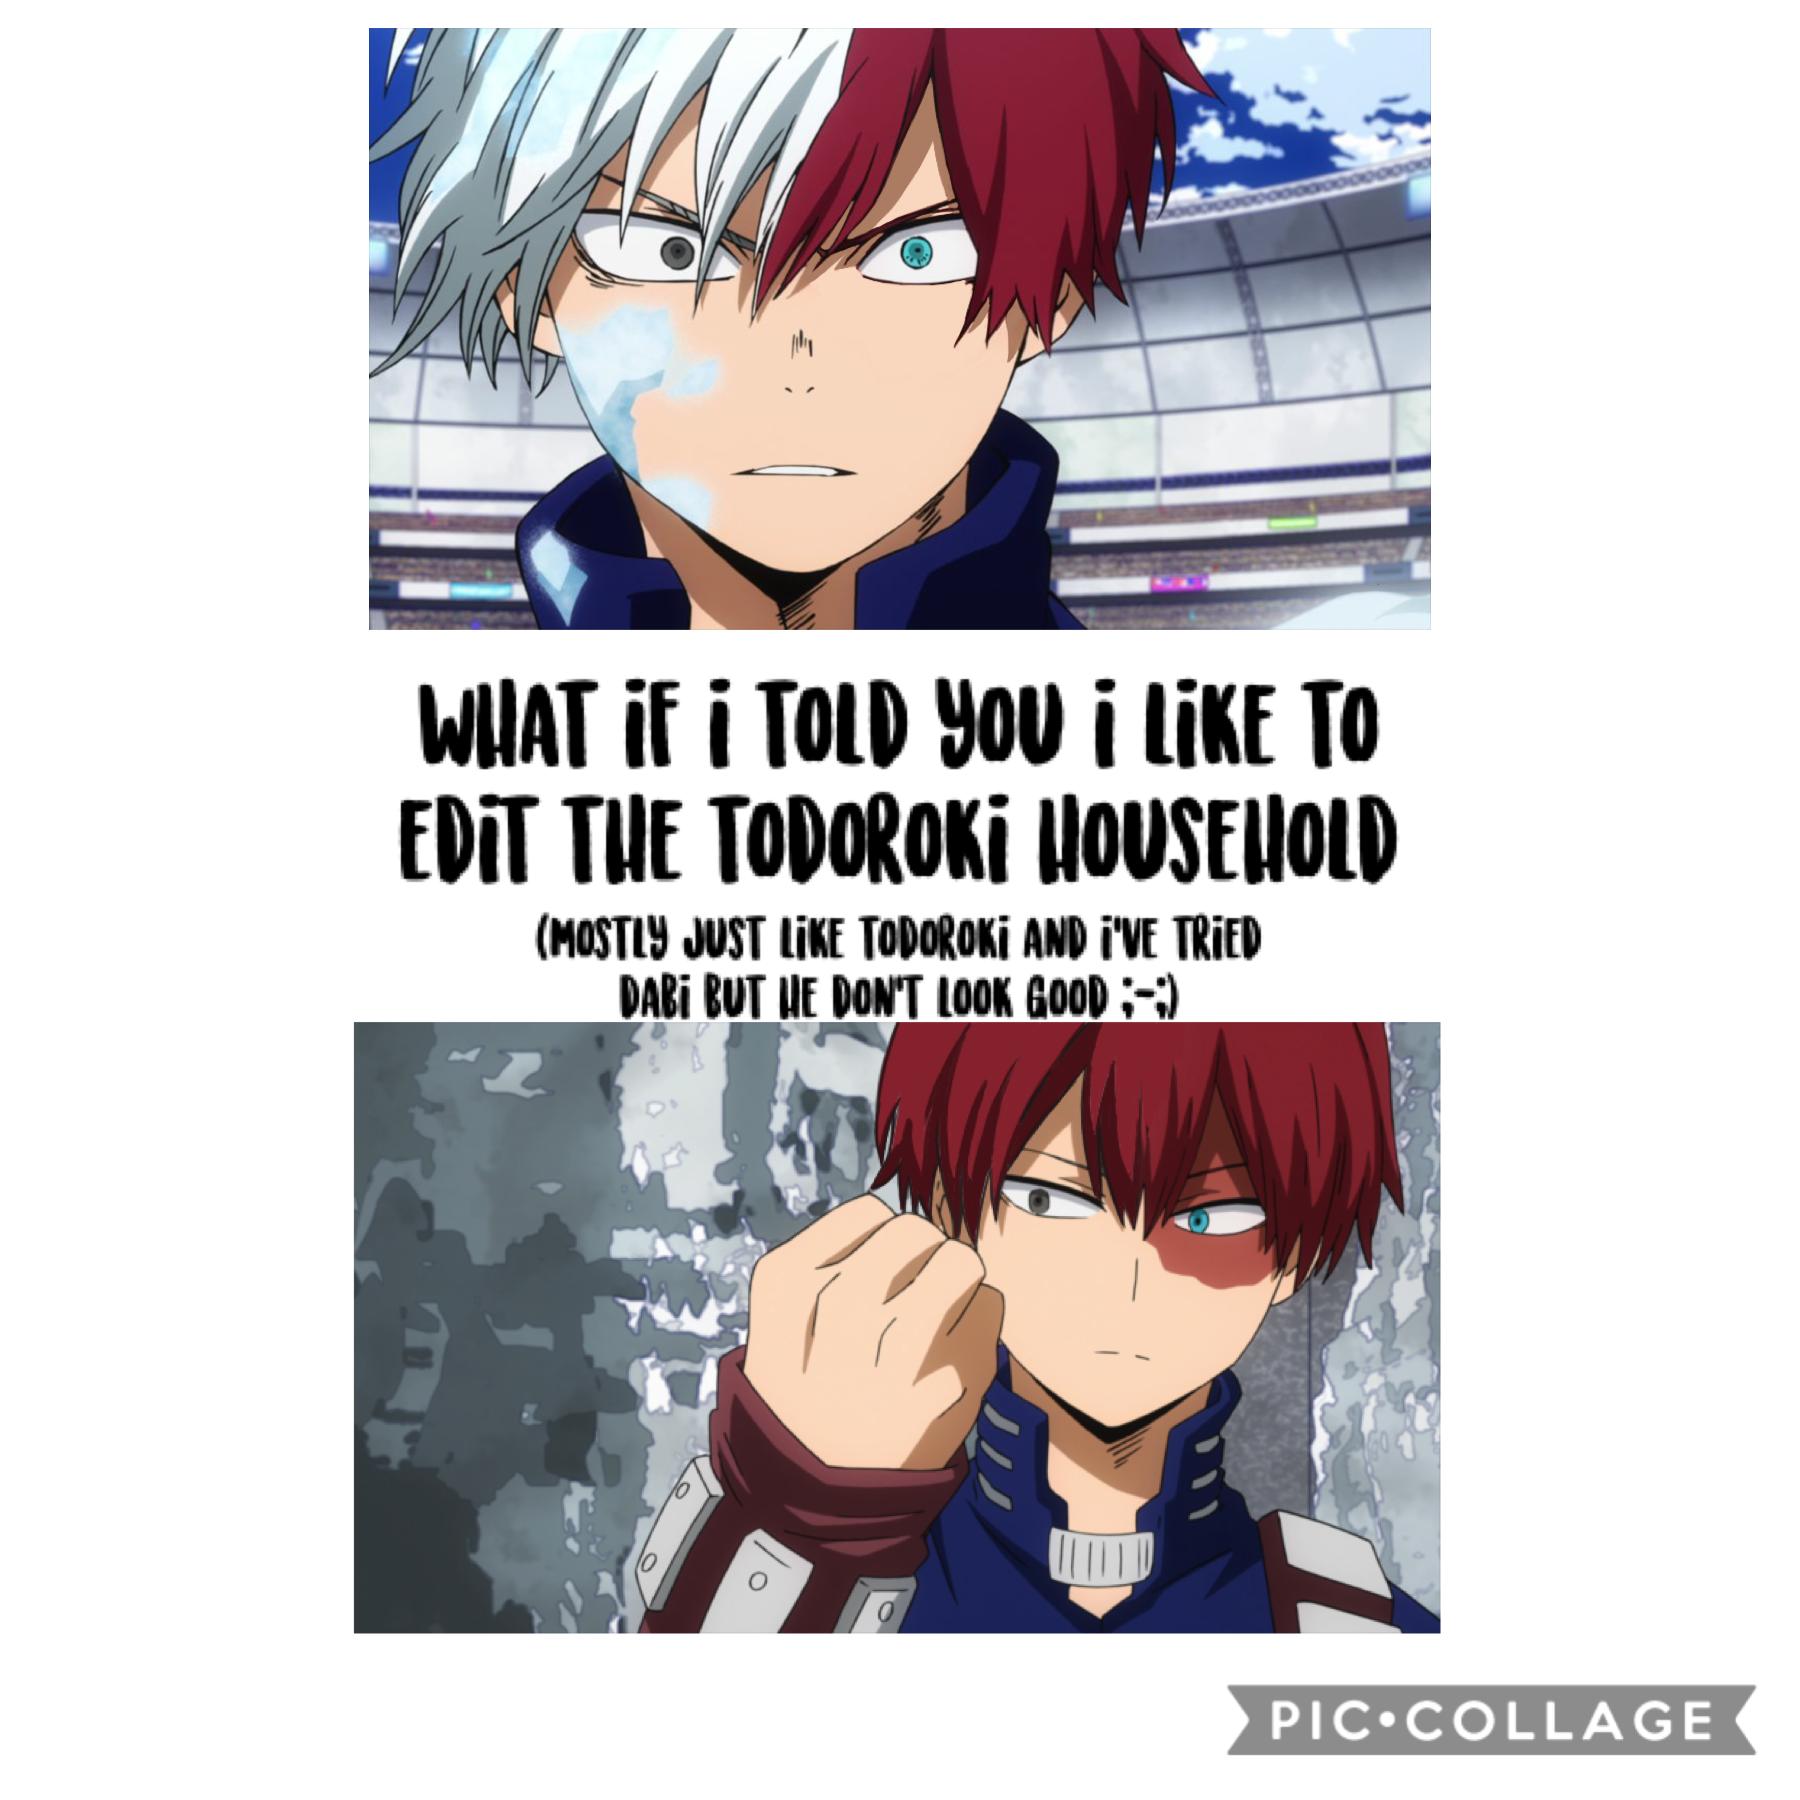 so um i like to edit the todoroki household to see what they’d look like since they all have the most varied appearances- i really do have problems have a plus ultra day and night!! ^^ (oh and my brother is sick so i can’t paint on his lights because I’m 